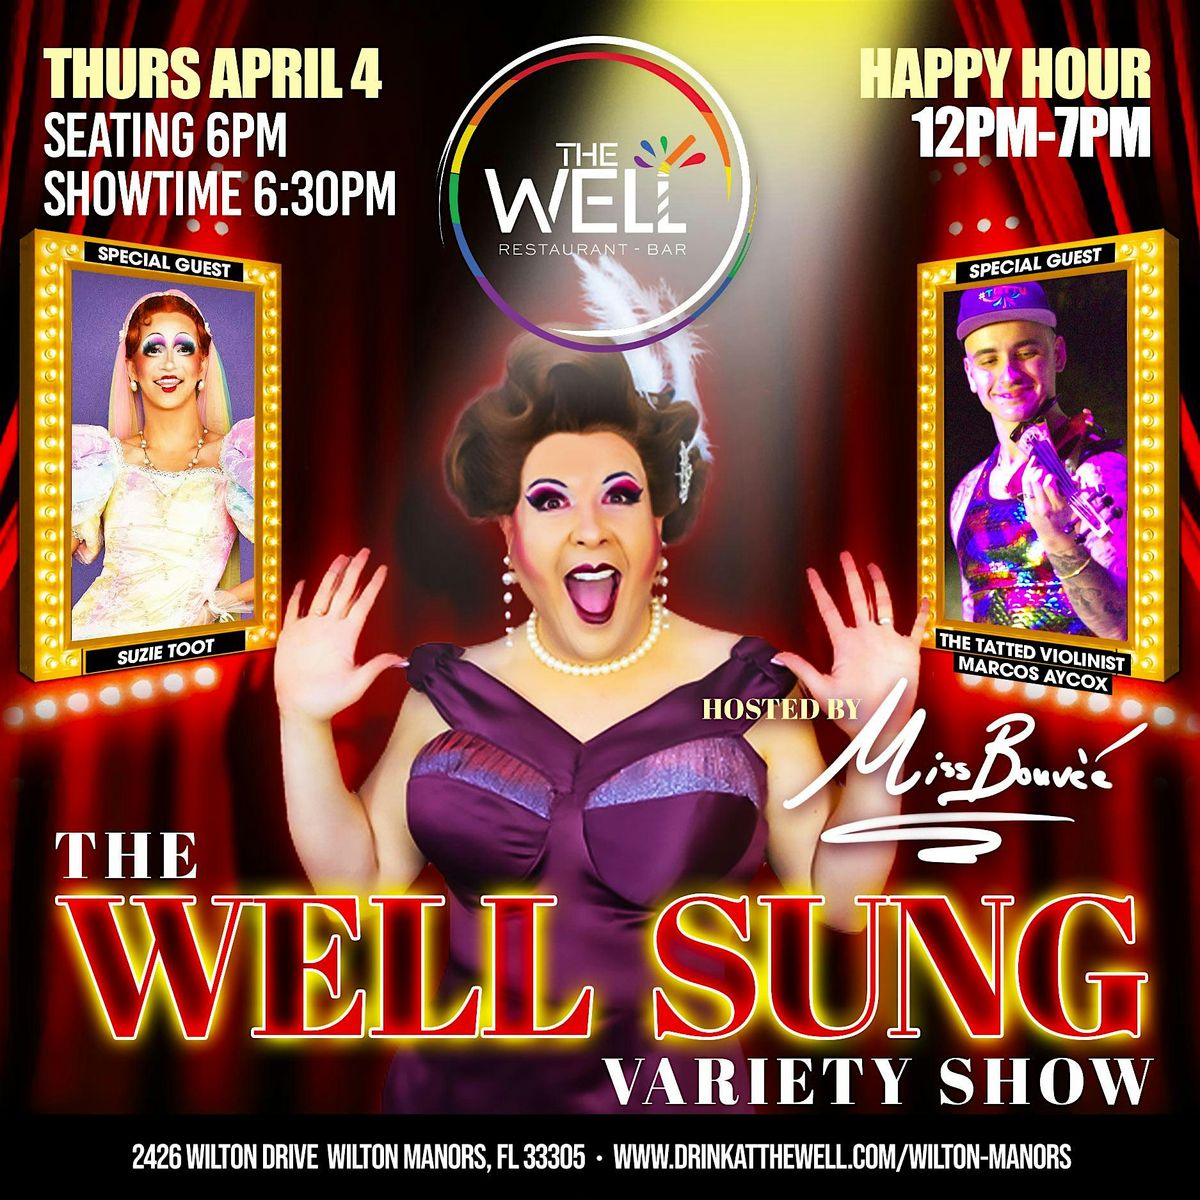 The Well Sung Variety Show